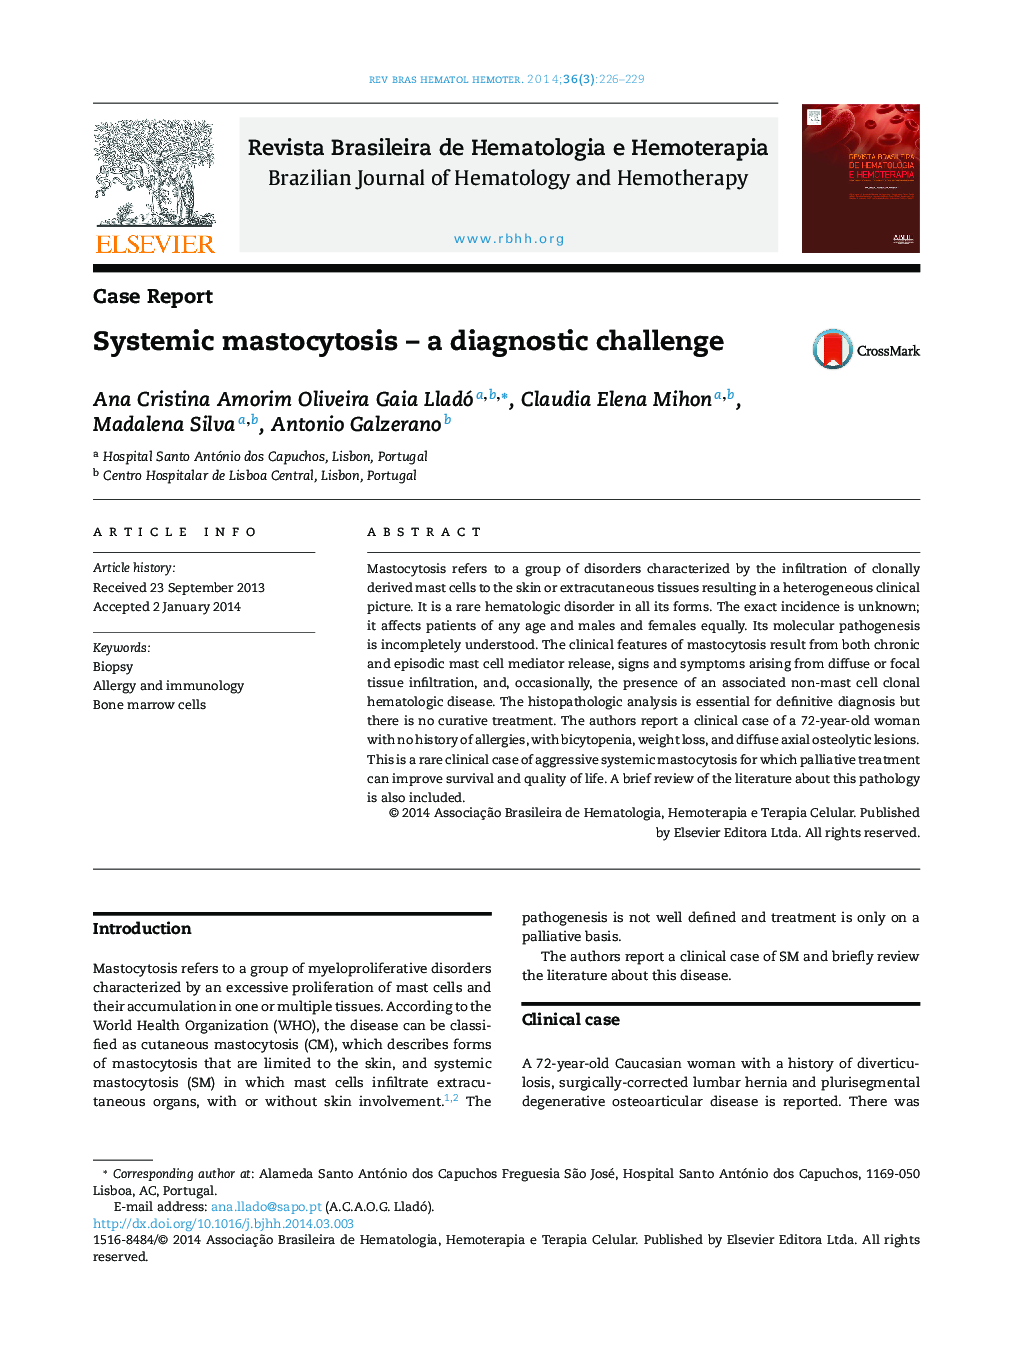 Systemic mastocytosis – a diagnostic challenge